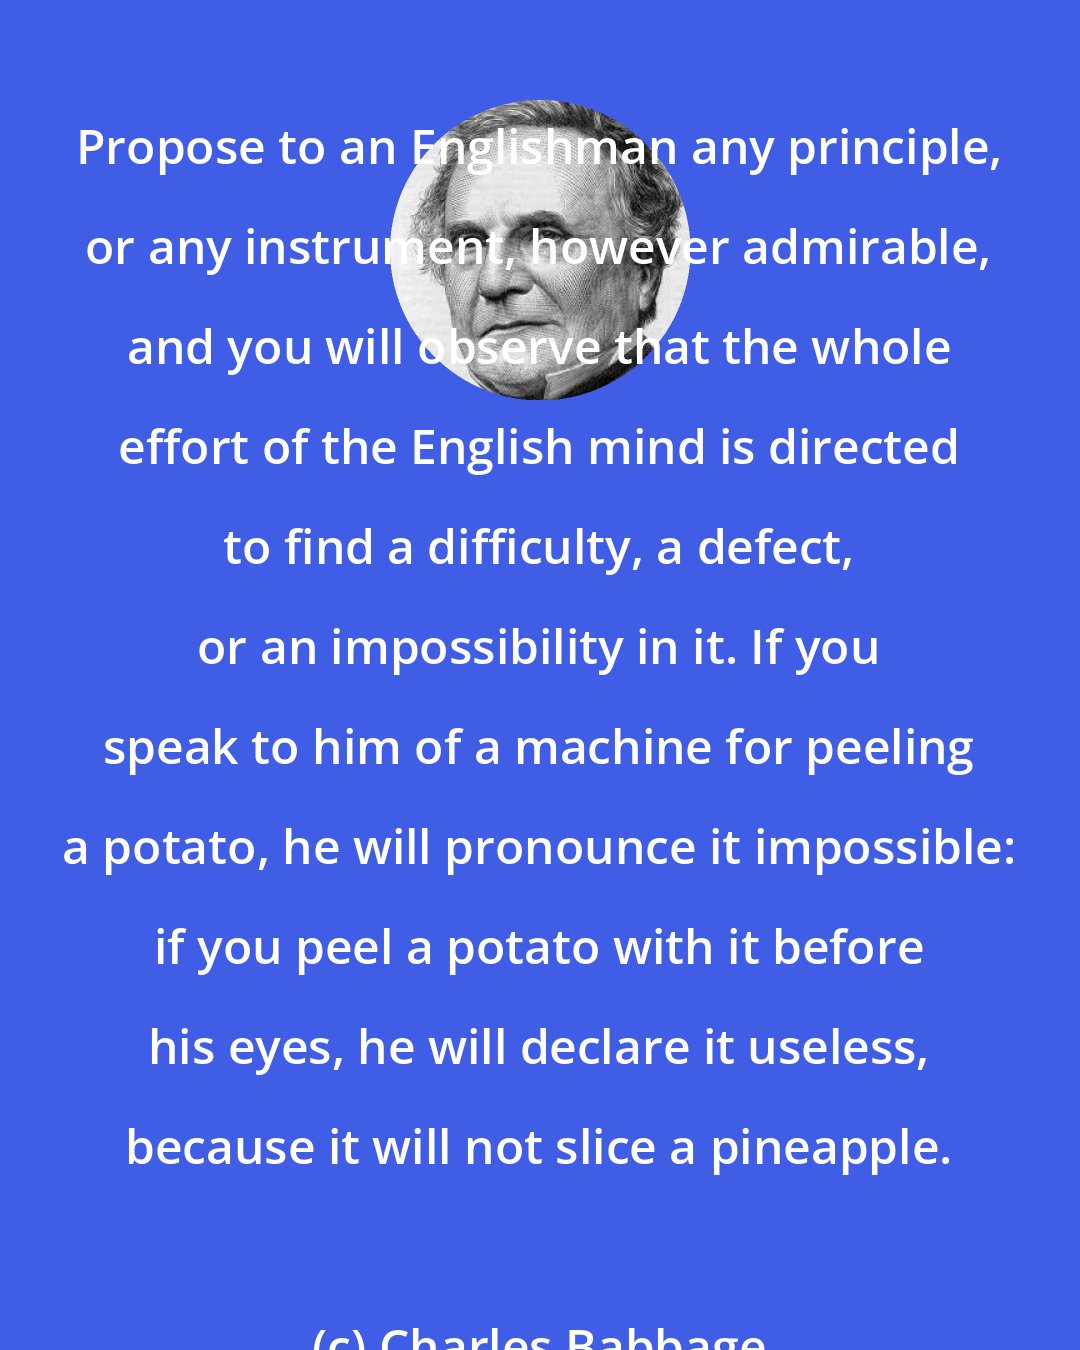 Charles Babbage: Propose to an Englishman any principle, or any instrument, however admirable, and you will observe that the whole effort of the English mind is directed to find a difficulty, a defect, or an impossibility in it. If you speak to him of a machine for peeling a potato, he will pronounce it impossible: if you peel a potato with it before his eyes, he will declare it useless, because it will not slice a pineapple.